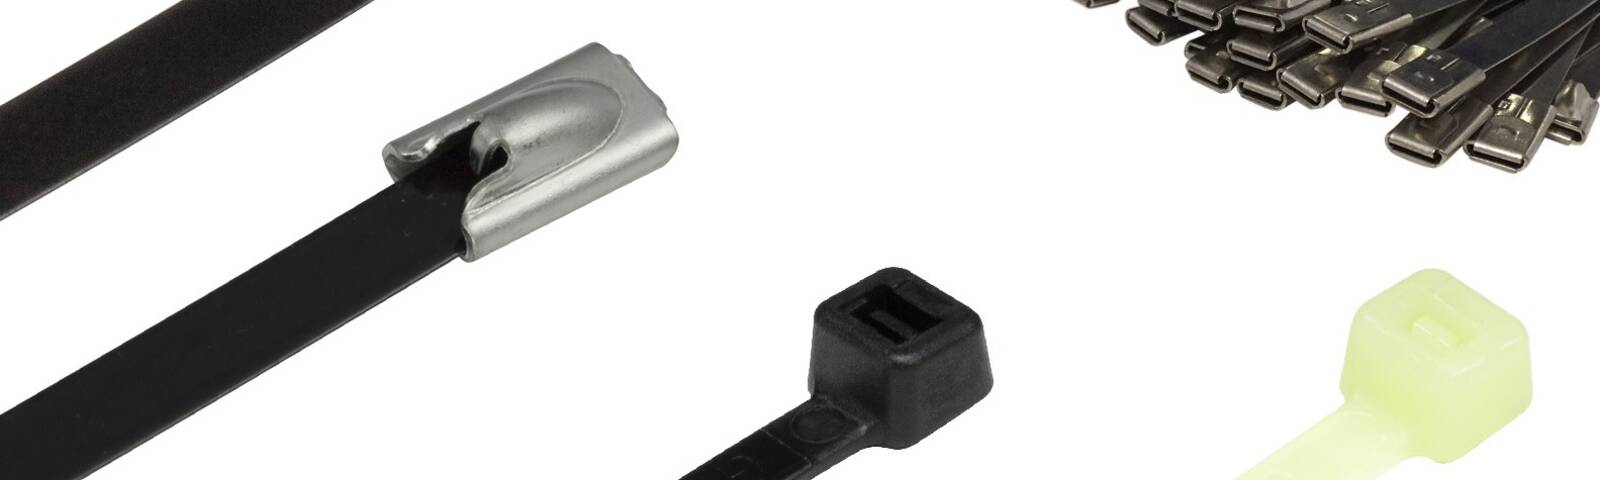 5 of the best heat resistant cable ties